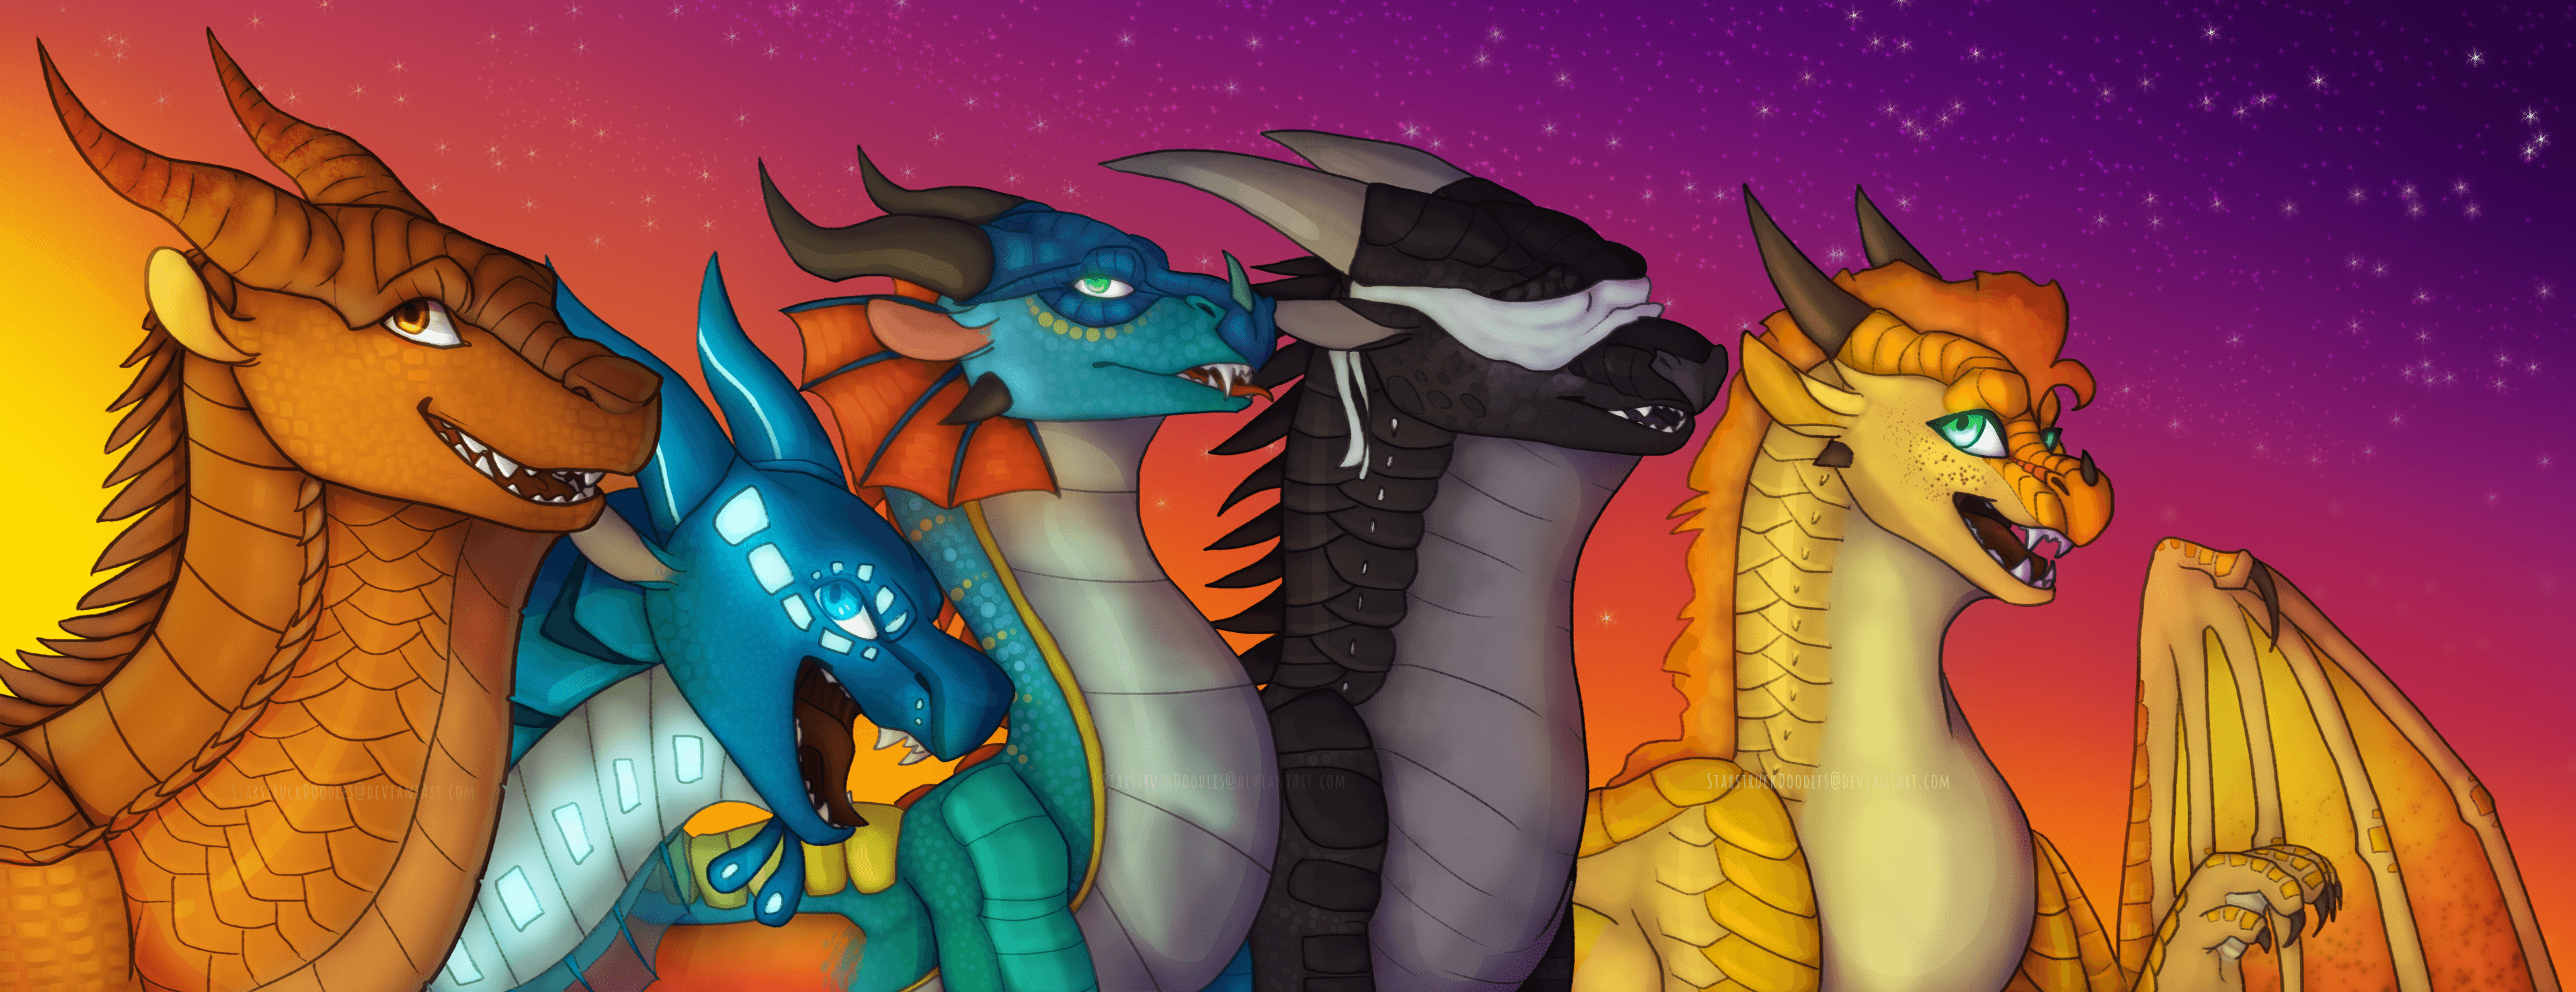 We Are The Dragonets Of Destiny (re Redraw) By StarstruckDoodles